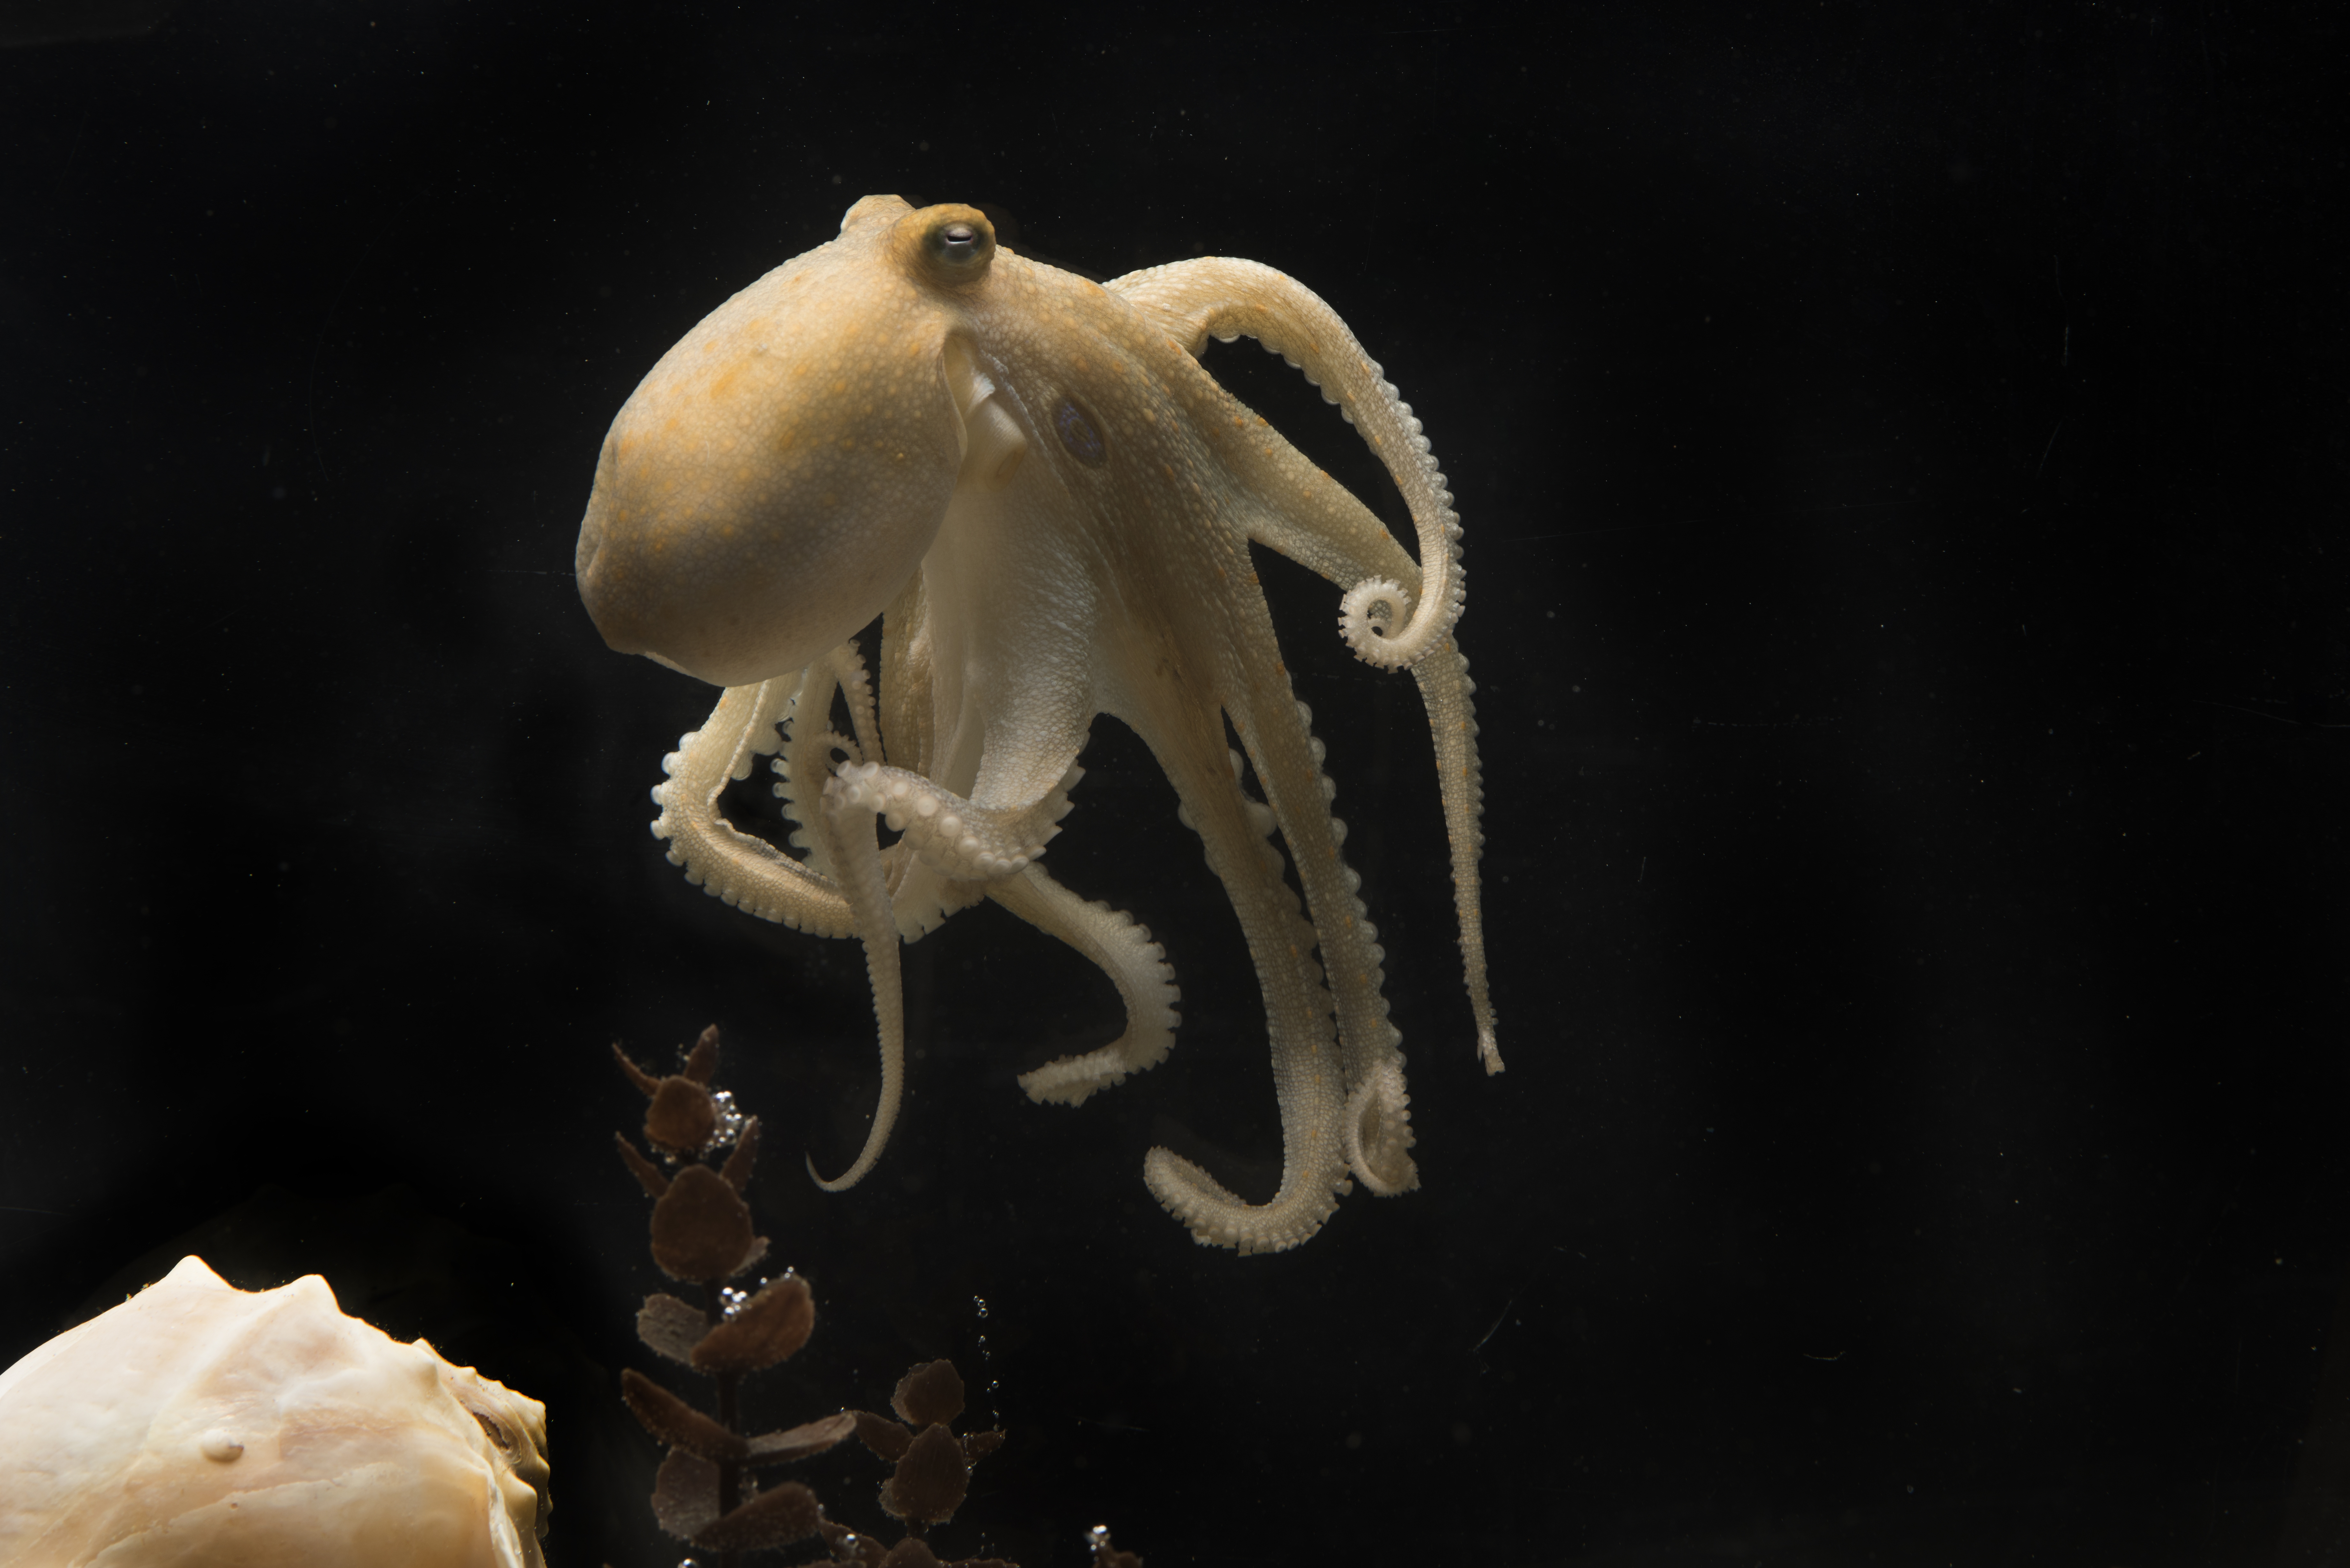 The California two-spot octopus, Octopus bimaculoides, was the first octopus genome to be sequenced (in 2015). Credit: Tom Kleindinst